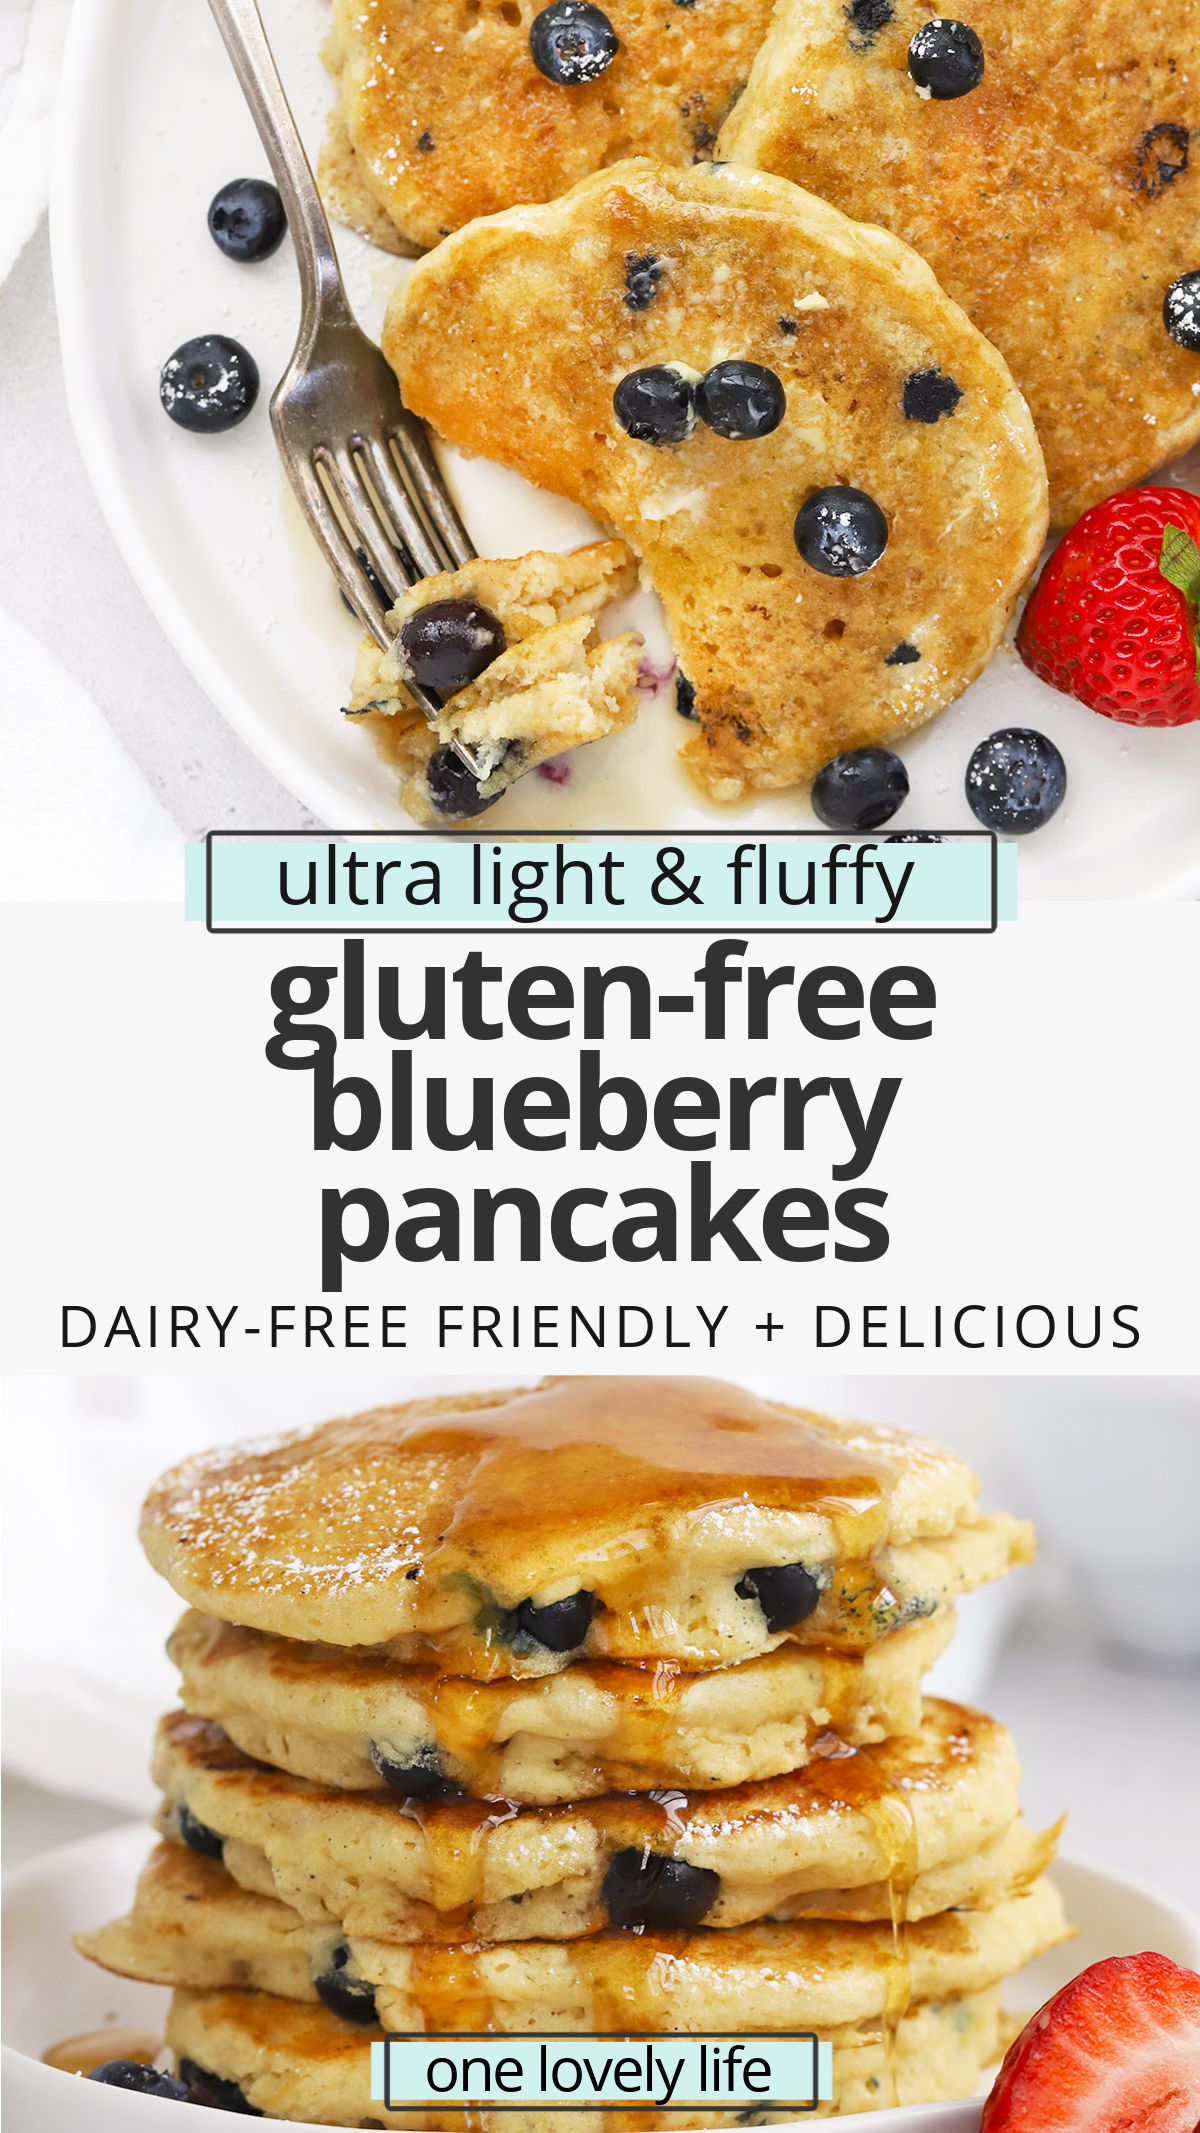 Fluffy Gluten-Free Blueberry Pancakes - These impossibly light, fluffy blueberry buttermilk pancakes are gluten-free, dairy-free & absolutely delicious. // gluten free blueberry pancakes recipe // dairy free blueberry pancakes // the best gluten-free blueberry pancakes // Gluten Free buttermilk blueberry pancakes #pancakes #blueberry #glutenfree #glutenfreepancakes